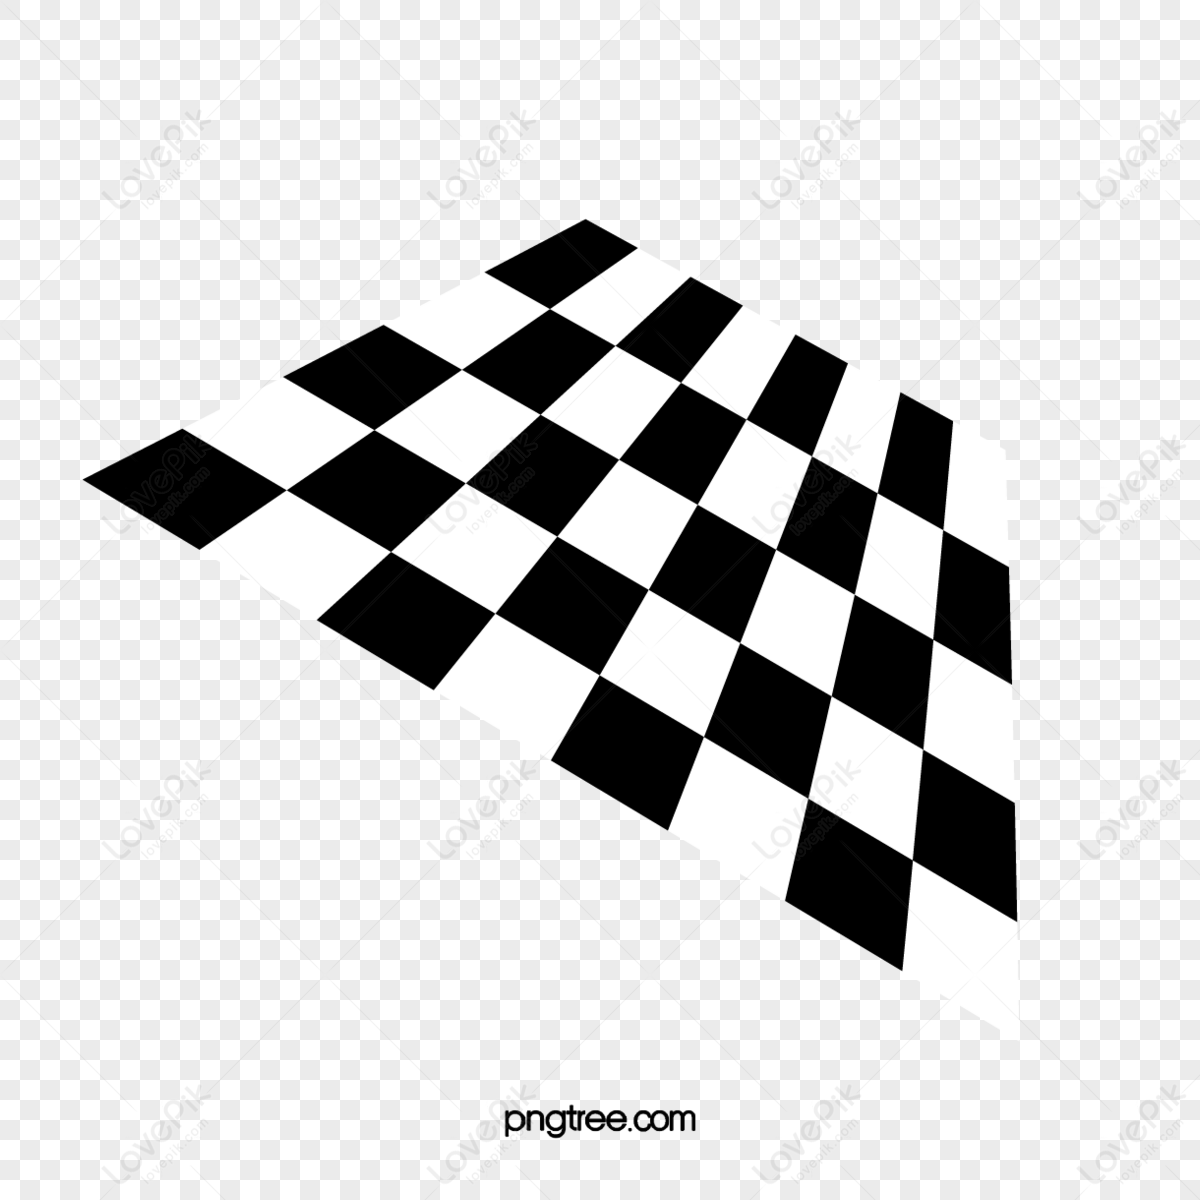 A Black Chess Board On Top Of A Blue Surface Background Wallpaper Image For  Free Download - Pngtree